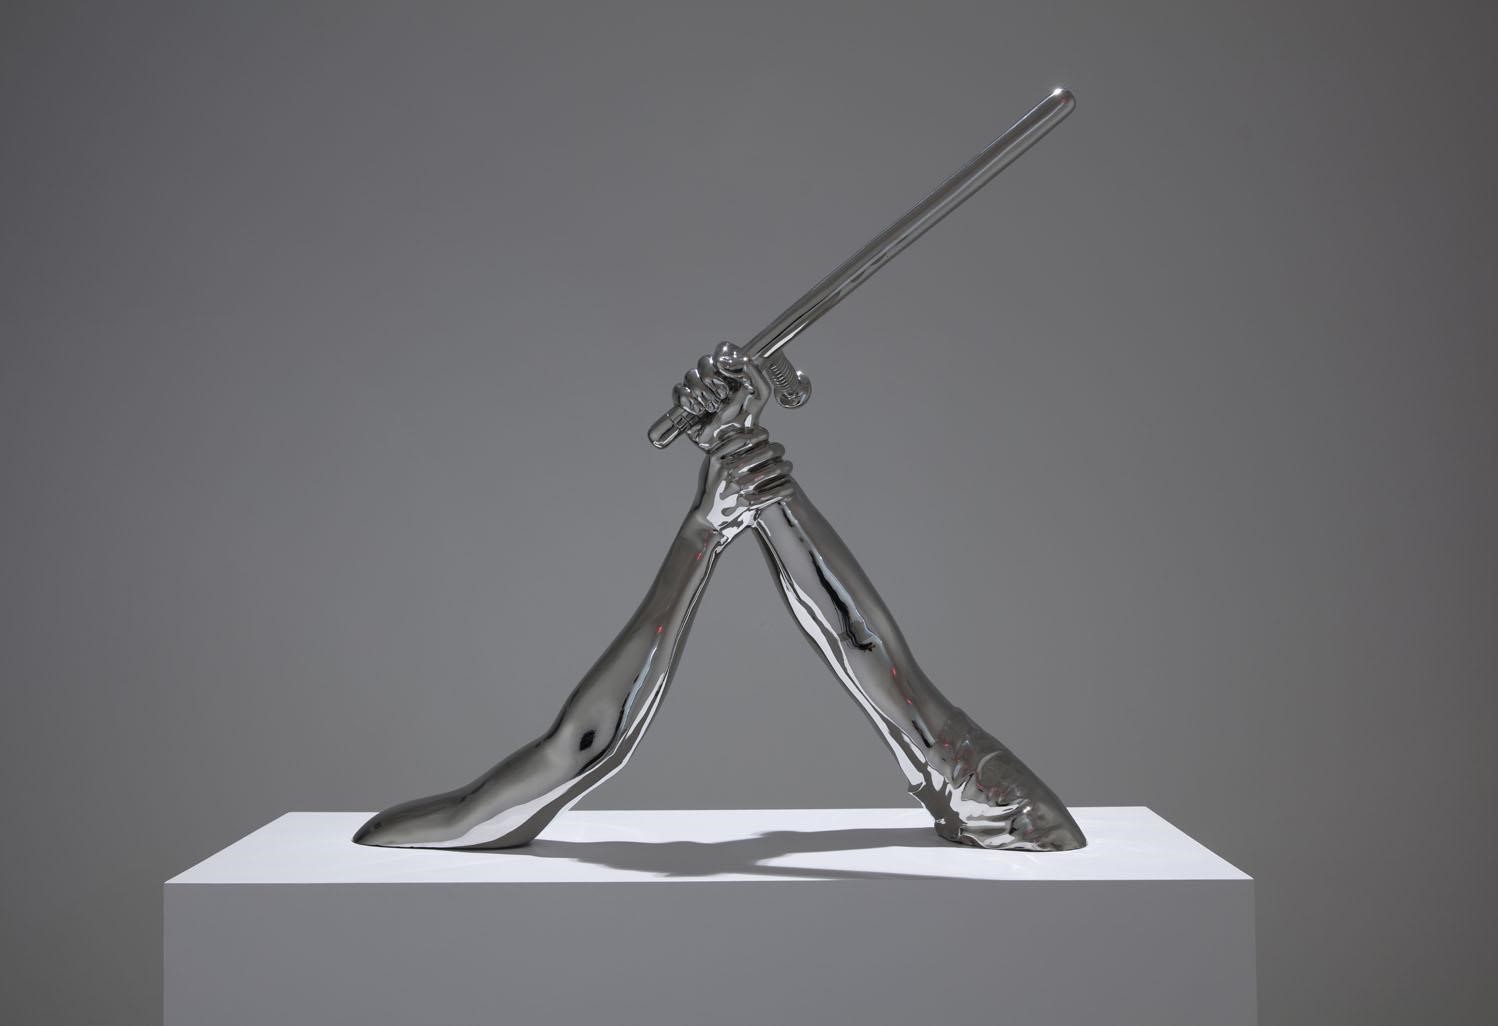 Photo of a metal sculpture by Hank Willis Thomas entitled Strike. It depicts two arms protruding from a white base. One arm is out-stretched and holding a baton-like instrument. The second arm is also reaching out, and has grasped the wrist of the other arm.